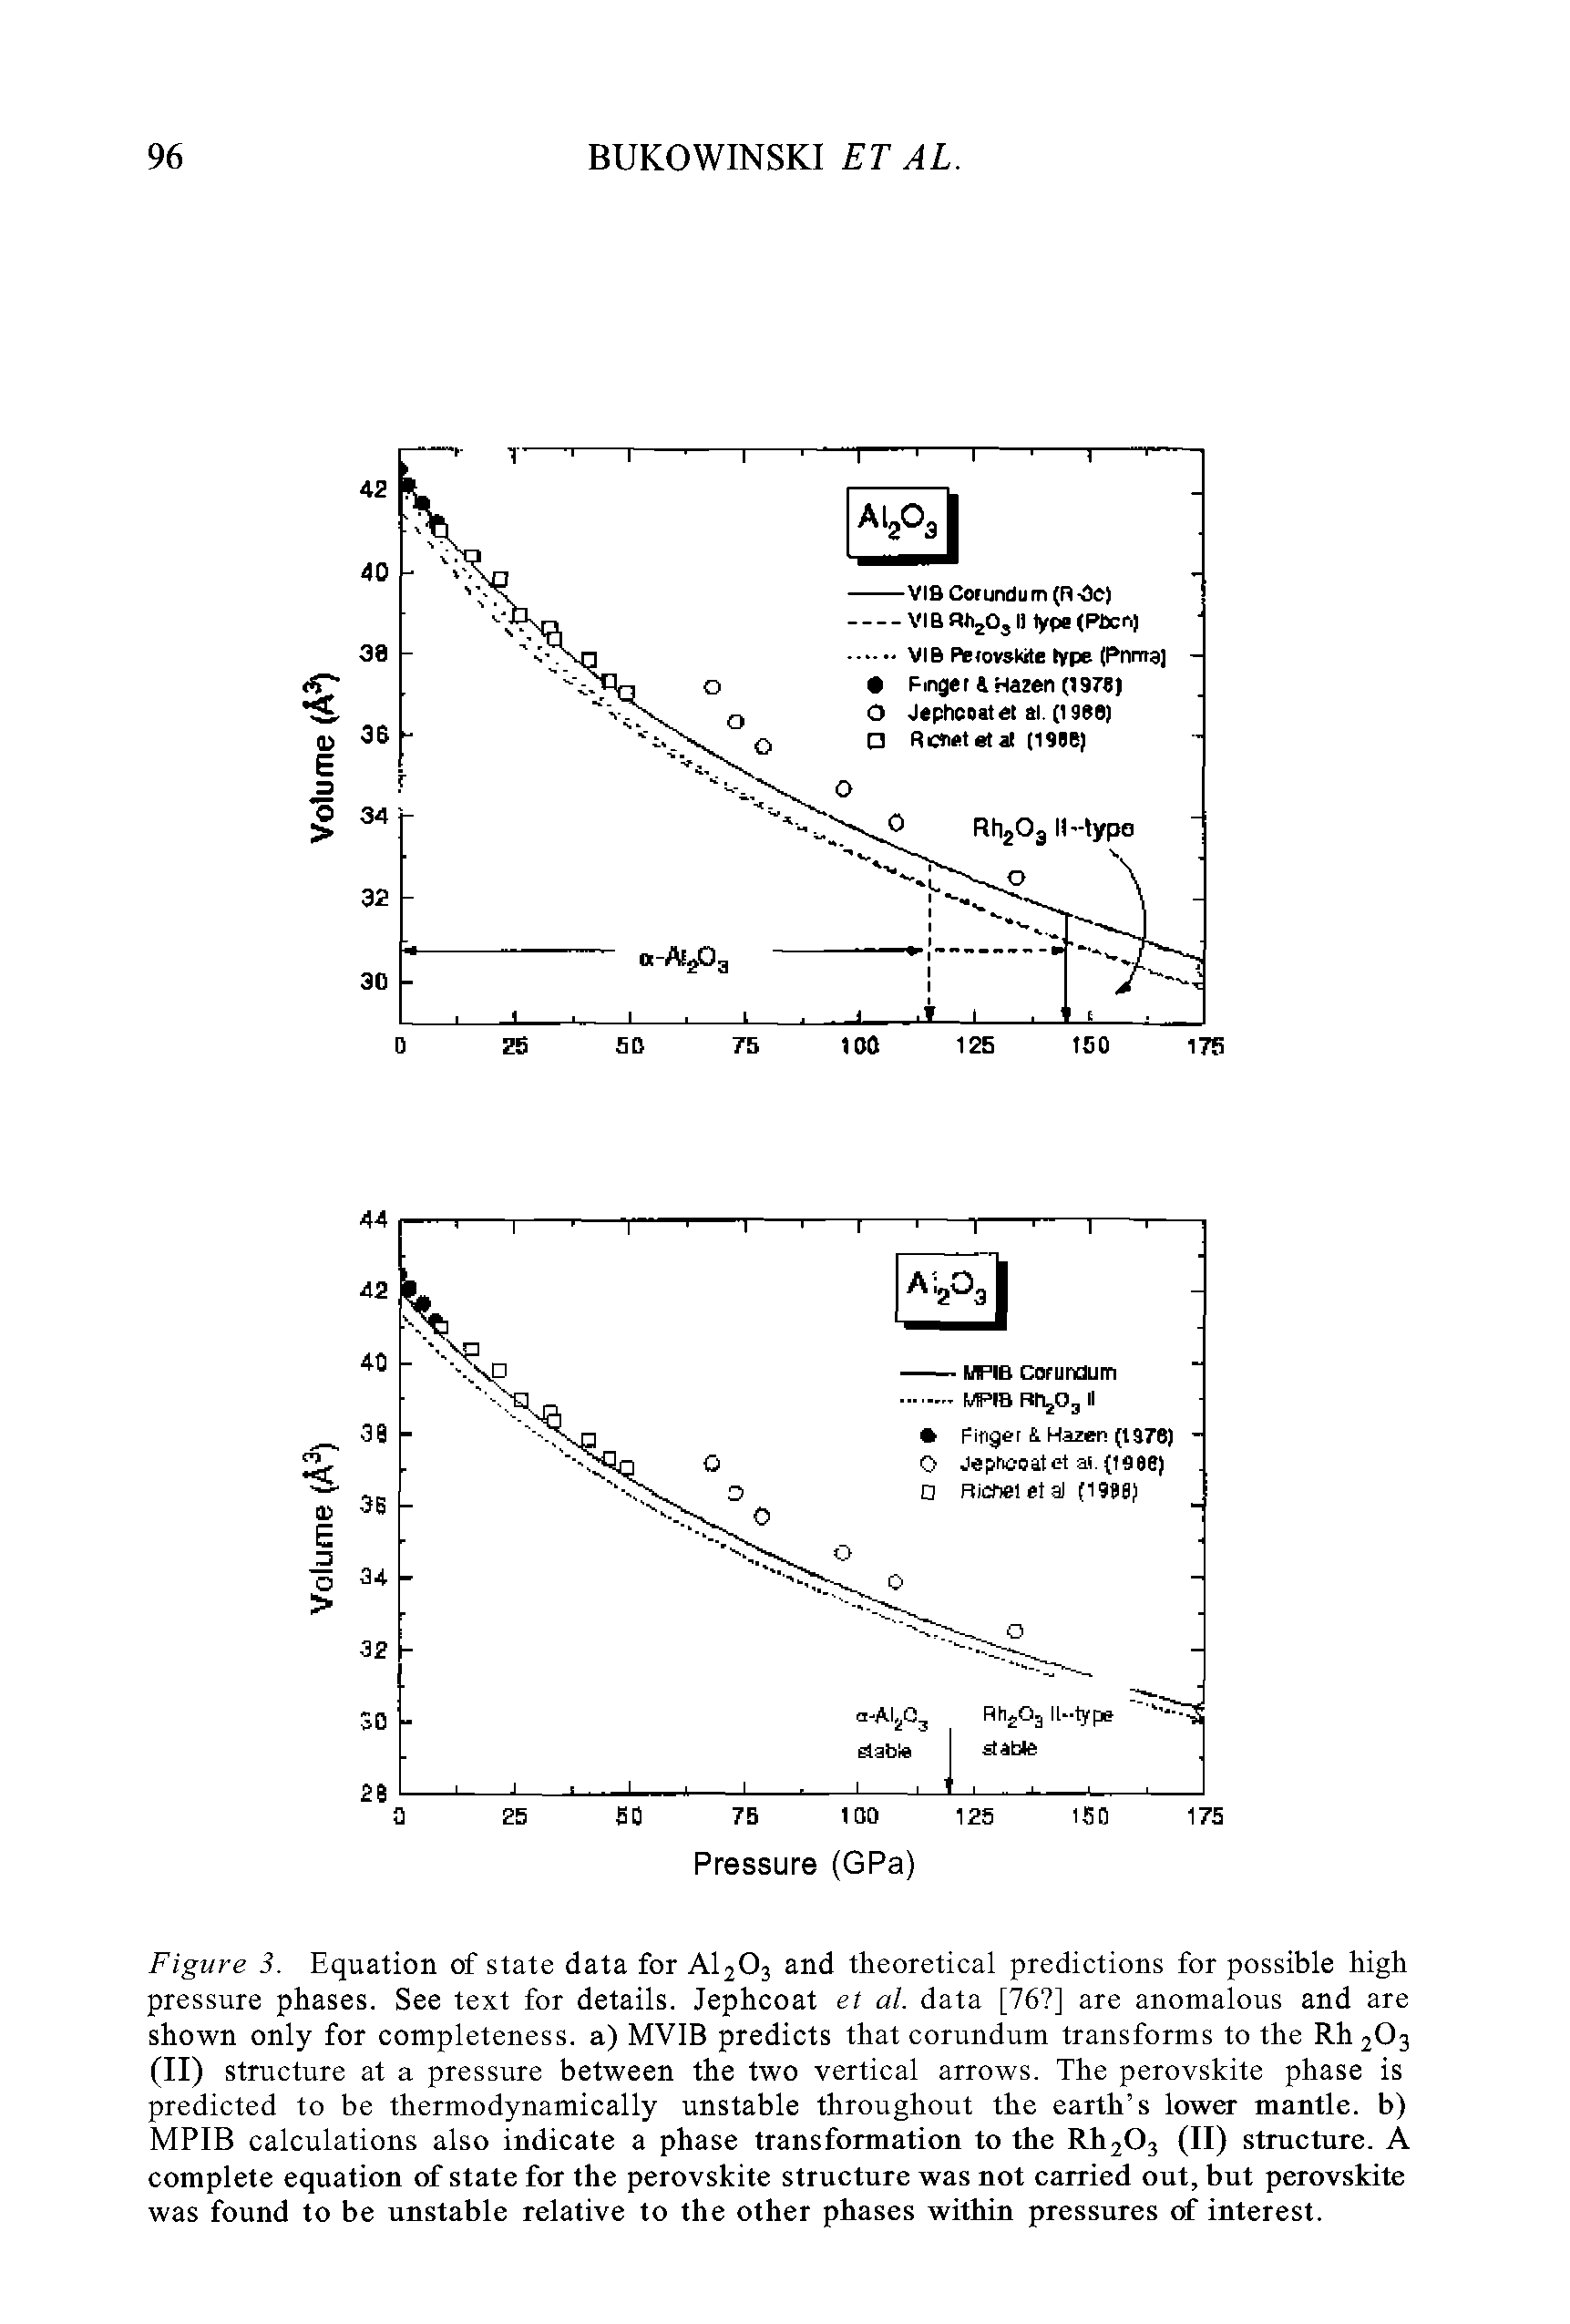 Figure 3. Equation of state data for AI2O3 and theoretical predictions for possible high pressure phases. See text for details. Jephcoat et al. data [76 ] are anomalous and are shown only for completeness, a) MVIB predicts that corundum transforms to the Rh 2O3 (II) structure at a pressure between the two vertical arrows. The perovskite phase is predicted to be thermodynamically unstable throughout the earth s lower mantle, b) MPIB calculations also indicate a phase transformation to the RhjOs (II) structure. A complete equation of state for the perovskite structure was not earried out, but perovskite was found to be unstable relative to the other phases within pressures of interest.